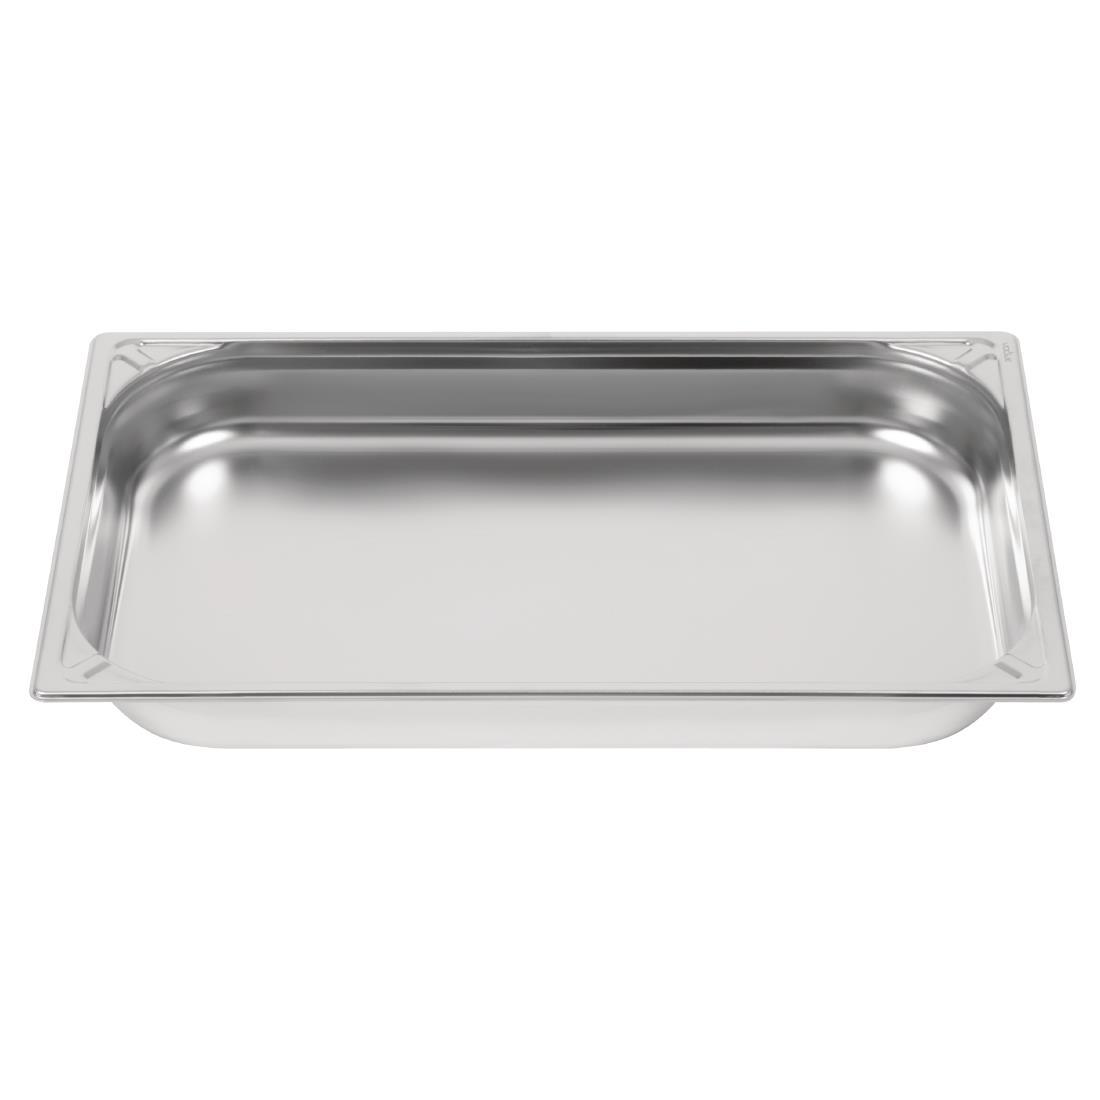 Vogue Heavy Duty Stainless Steel 1/1 Gastronorm Pan 65mm - DW433  - 3